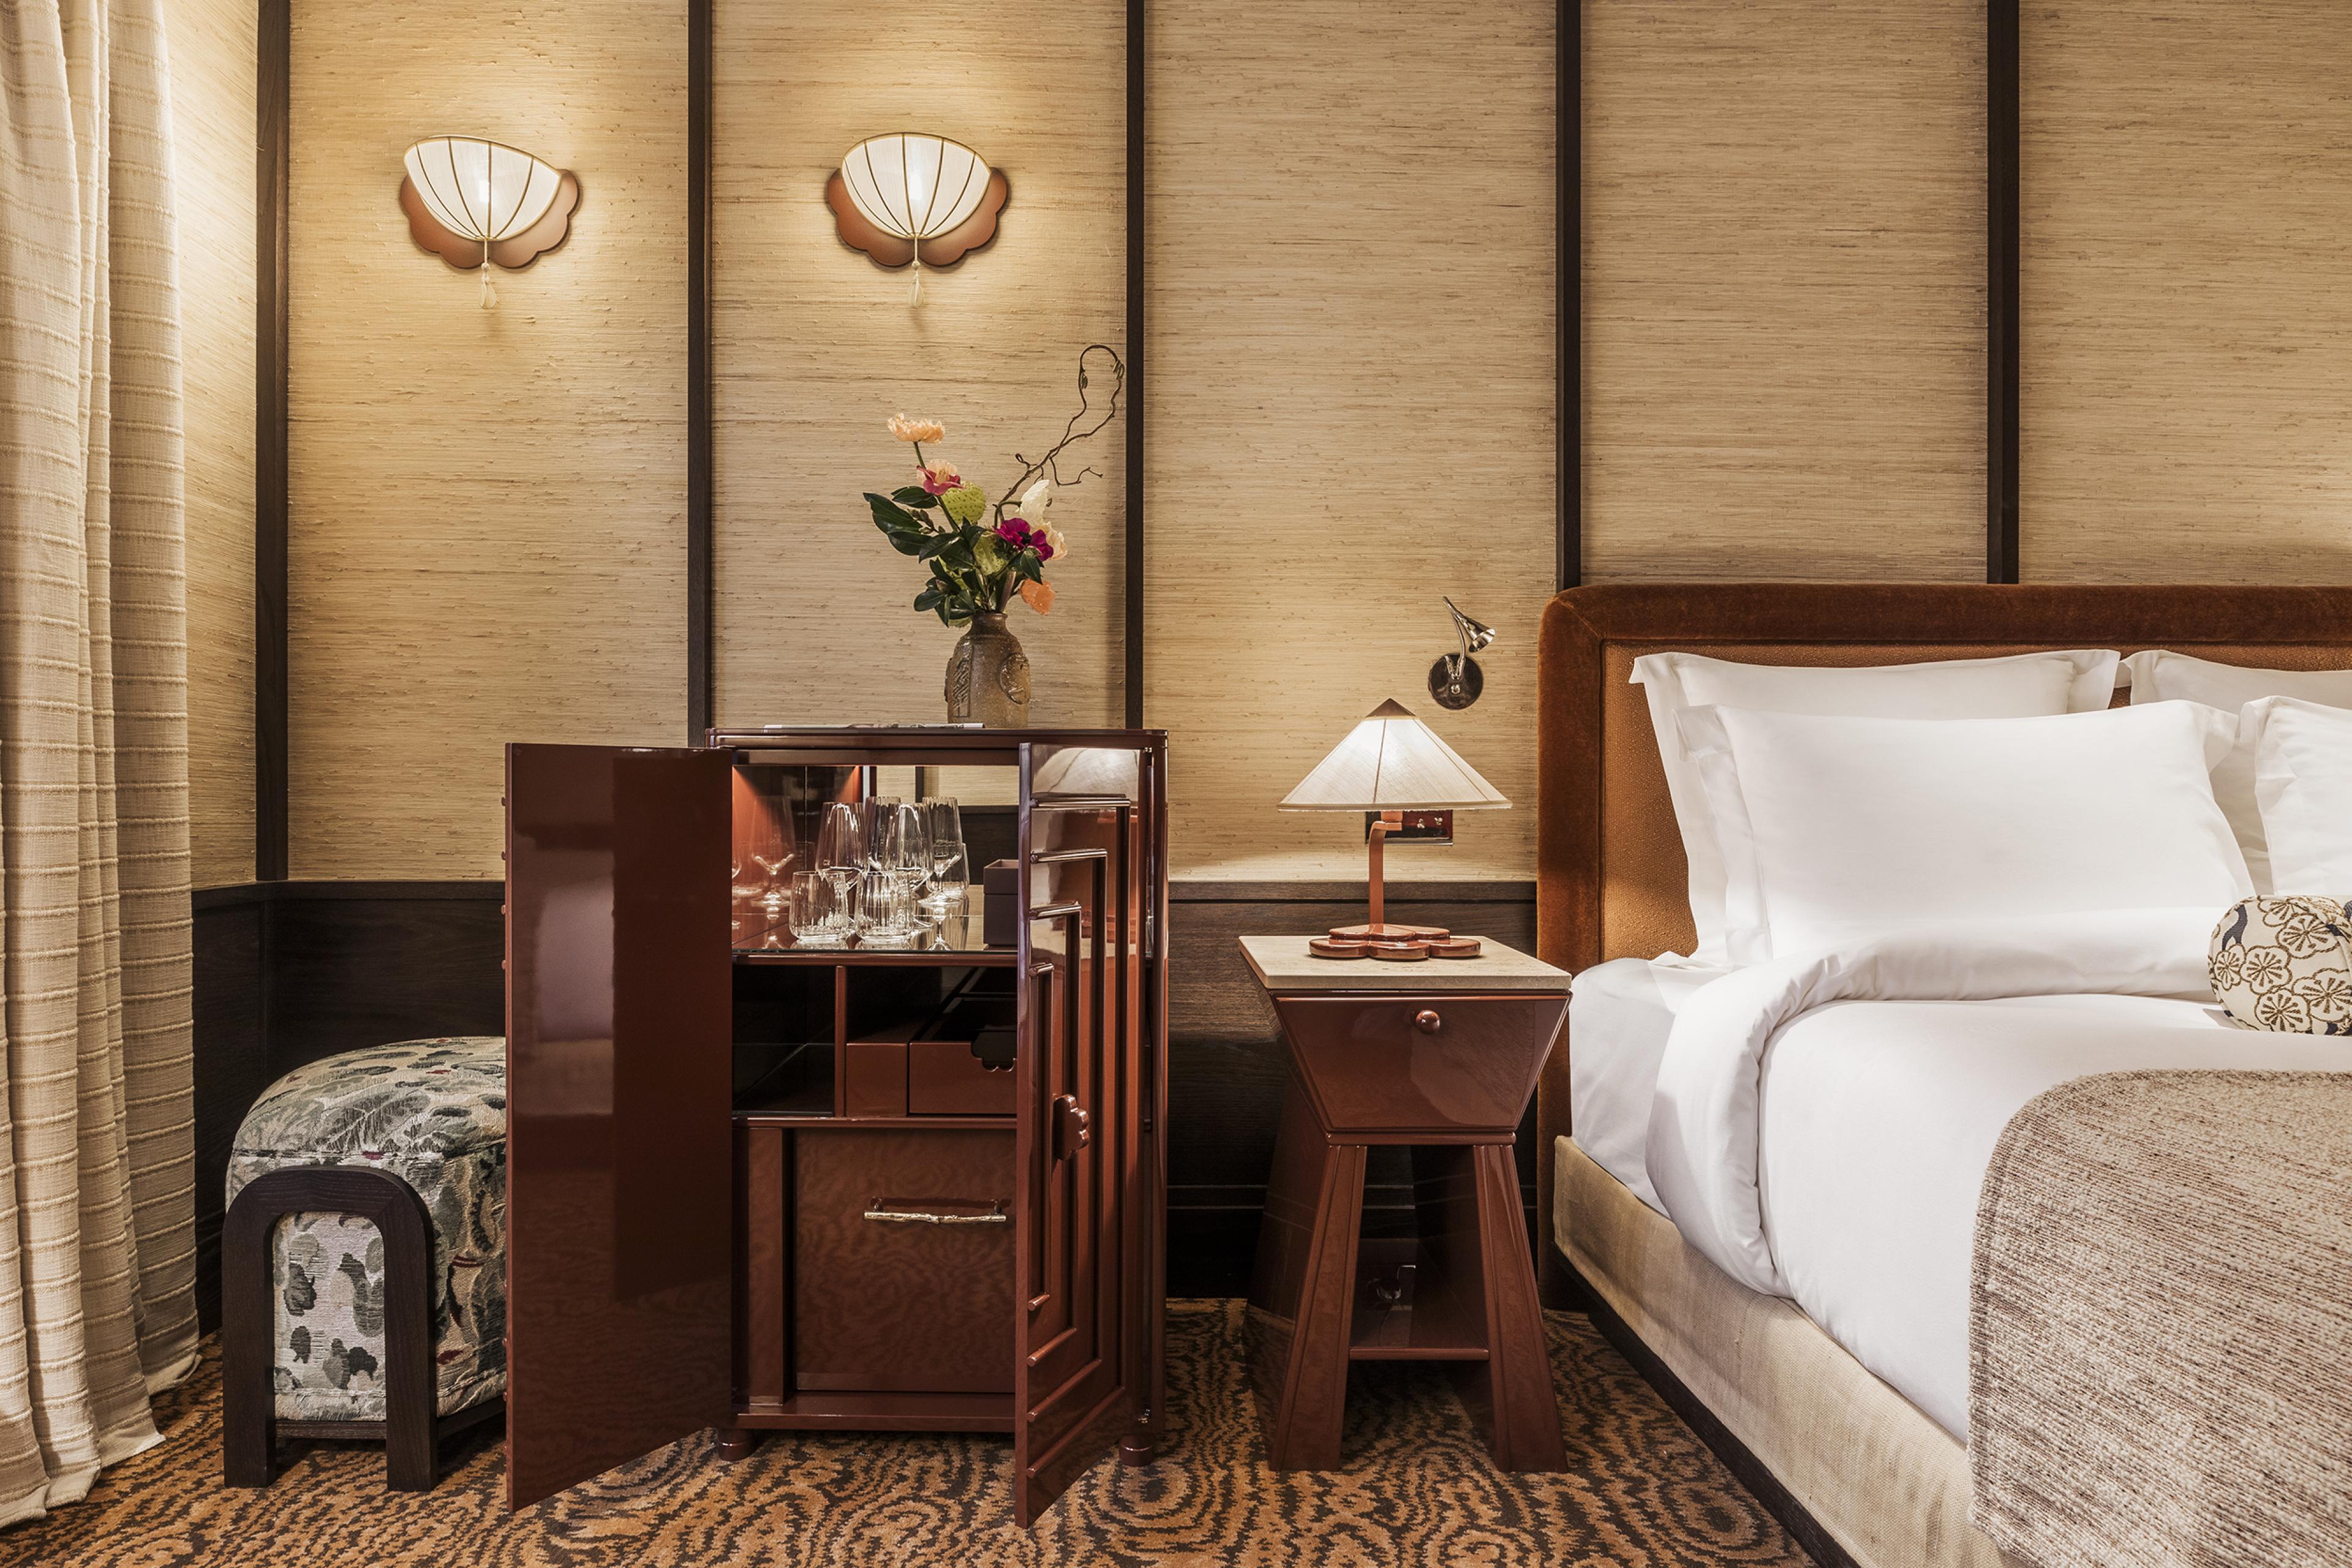 hotel room with straw-lined walls inspired by Japan and brown wood furniture and a white linen bed on right